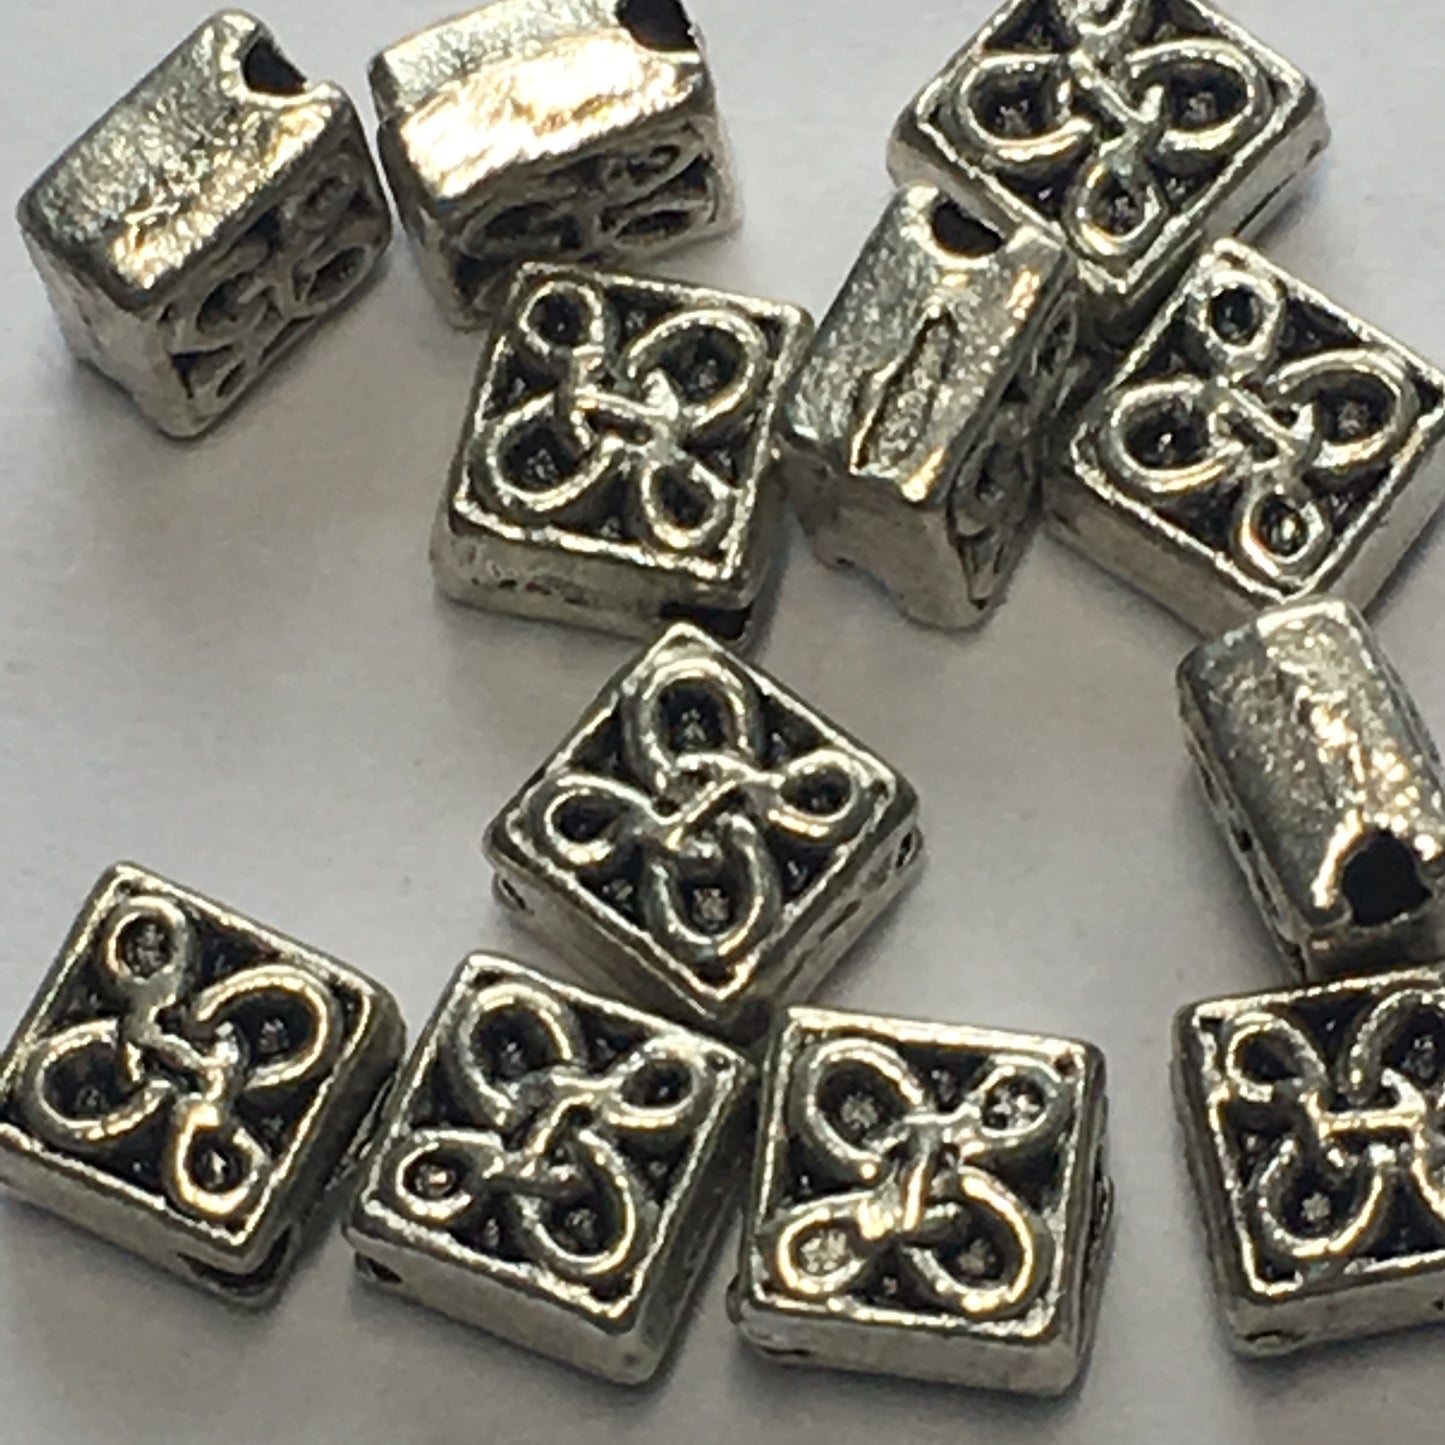 Antique Silver Celtic Diamond Beads, Hole on Point,  6 mm - 14 Beads